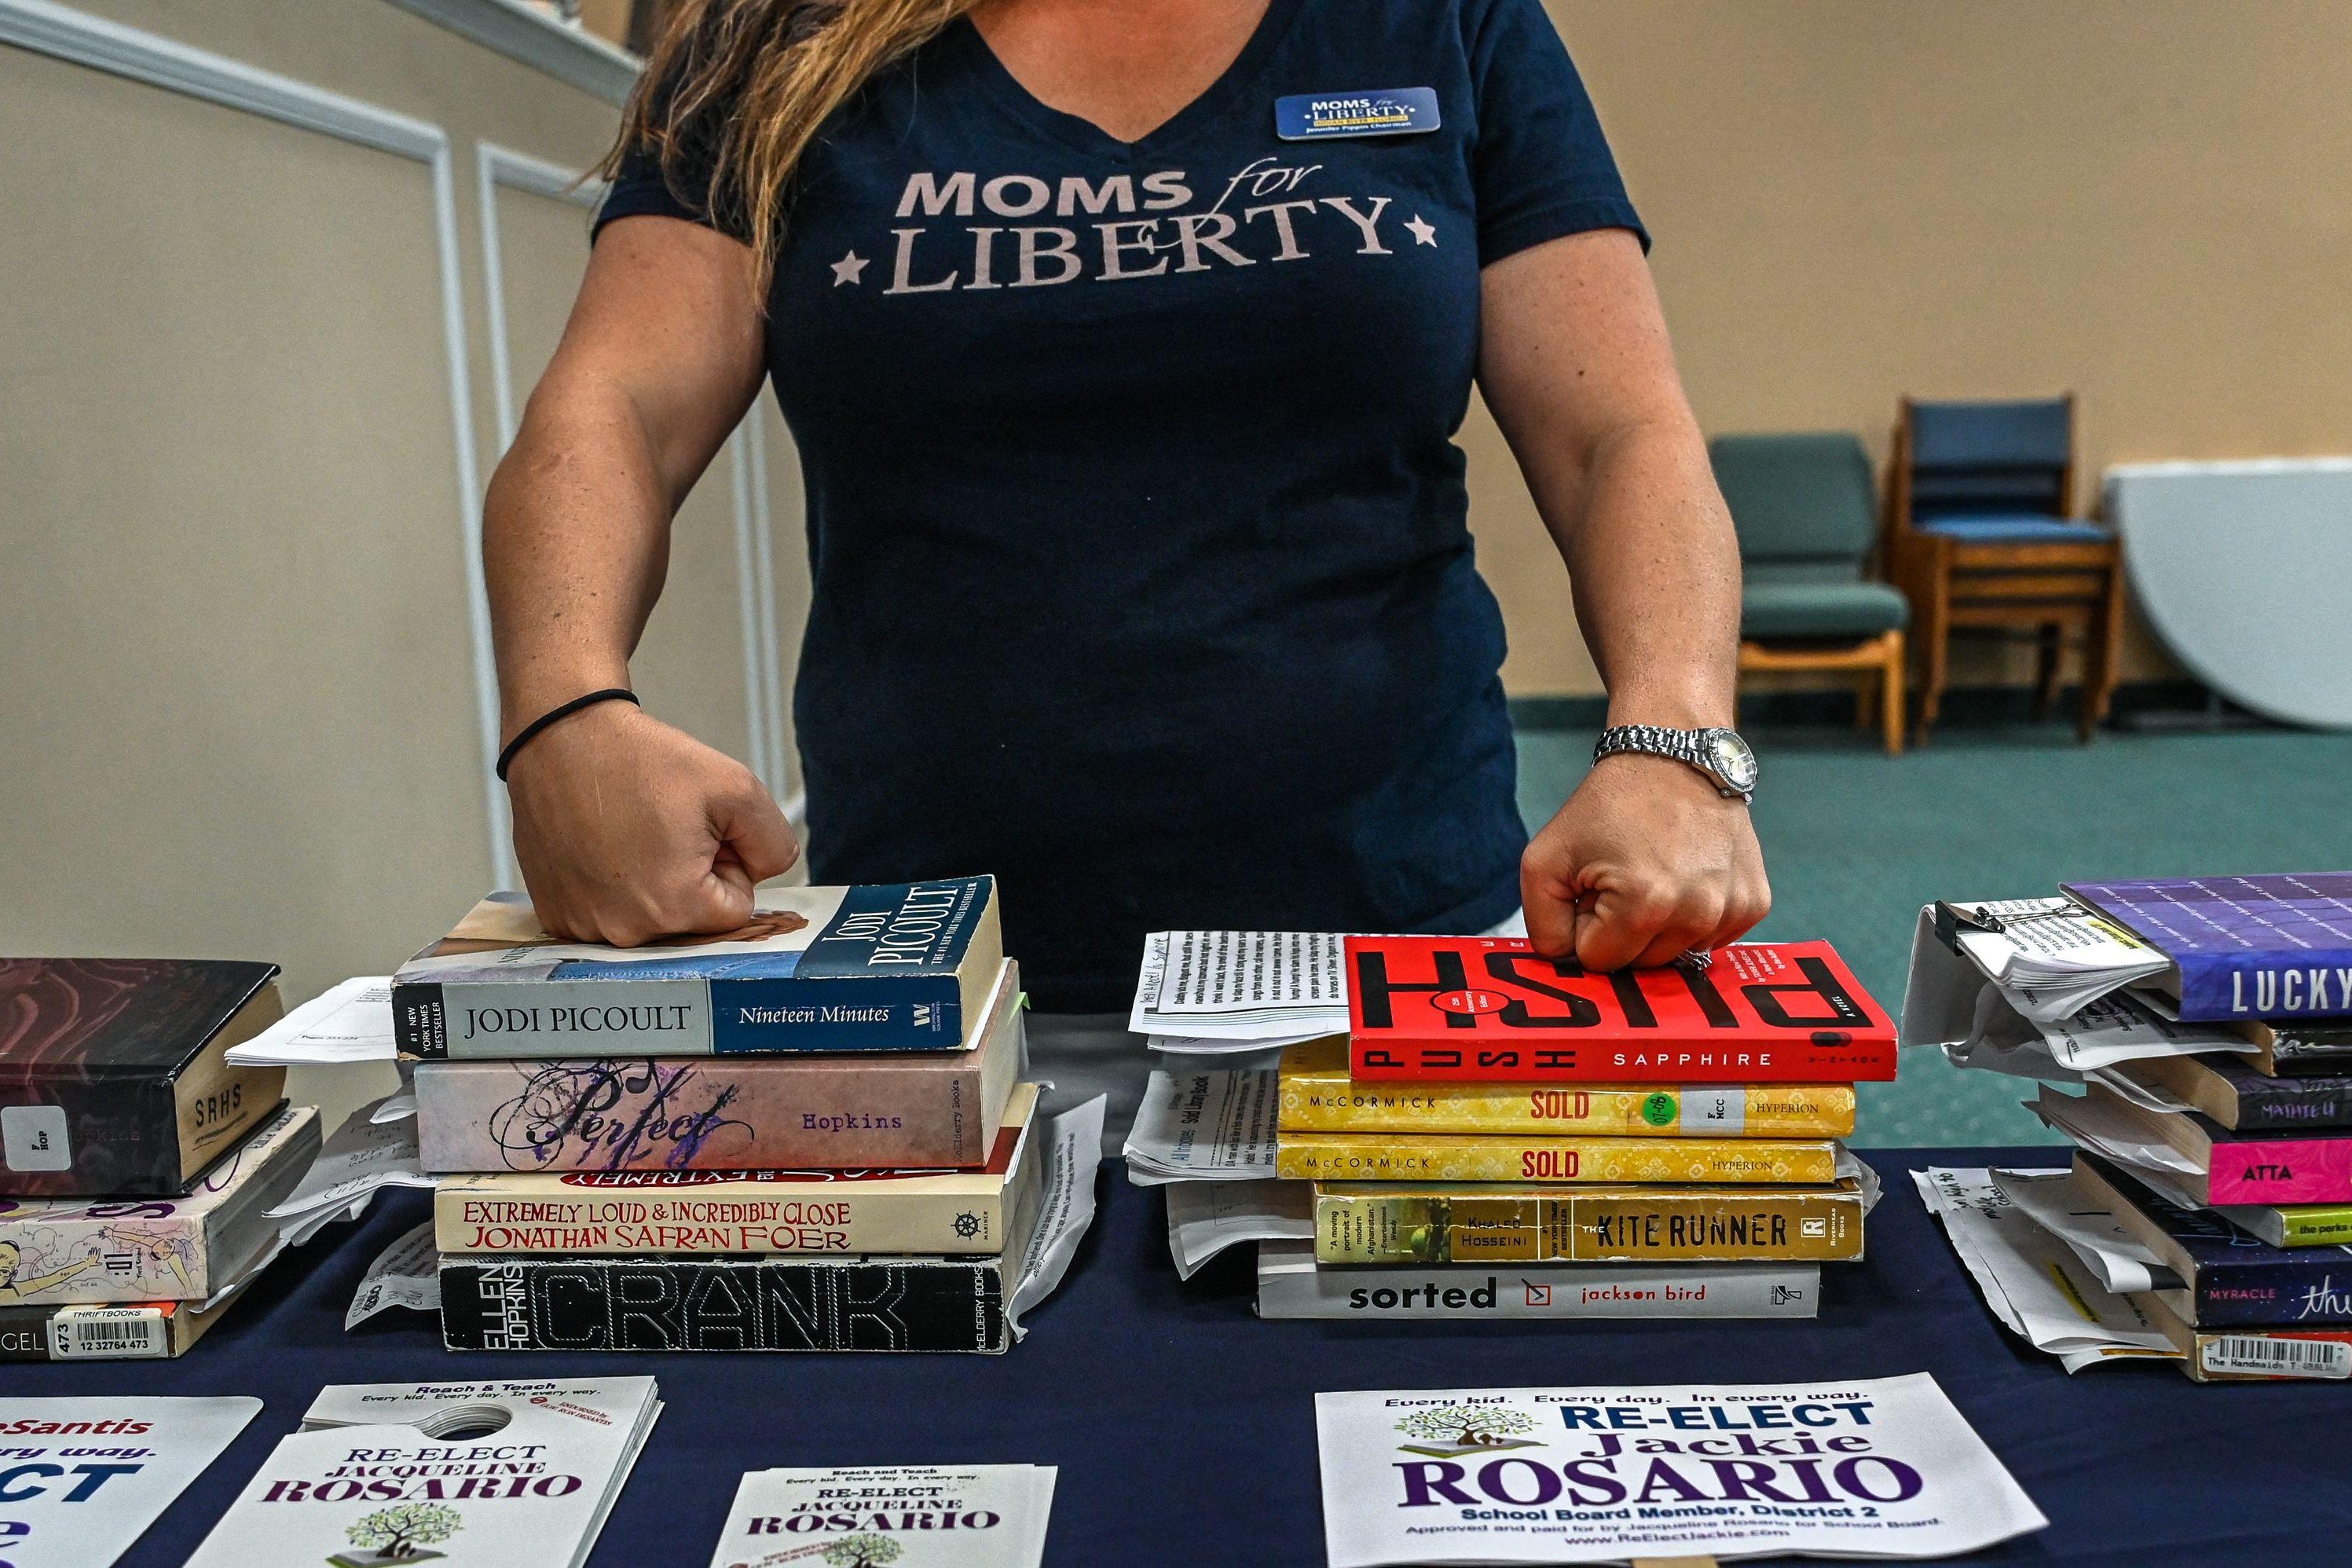 Pippin wearing a "Moms for Liberty" shirt and placing her hands over stacks of books.